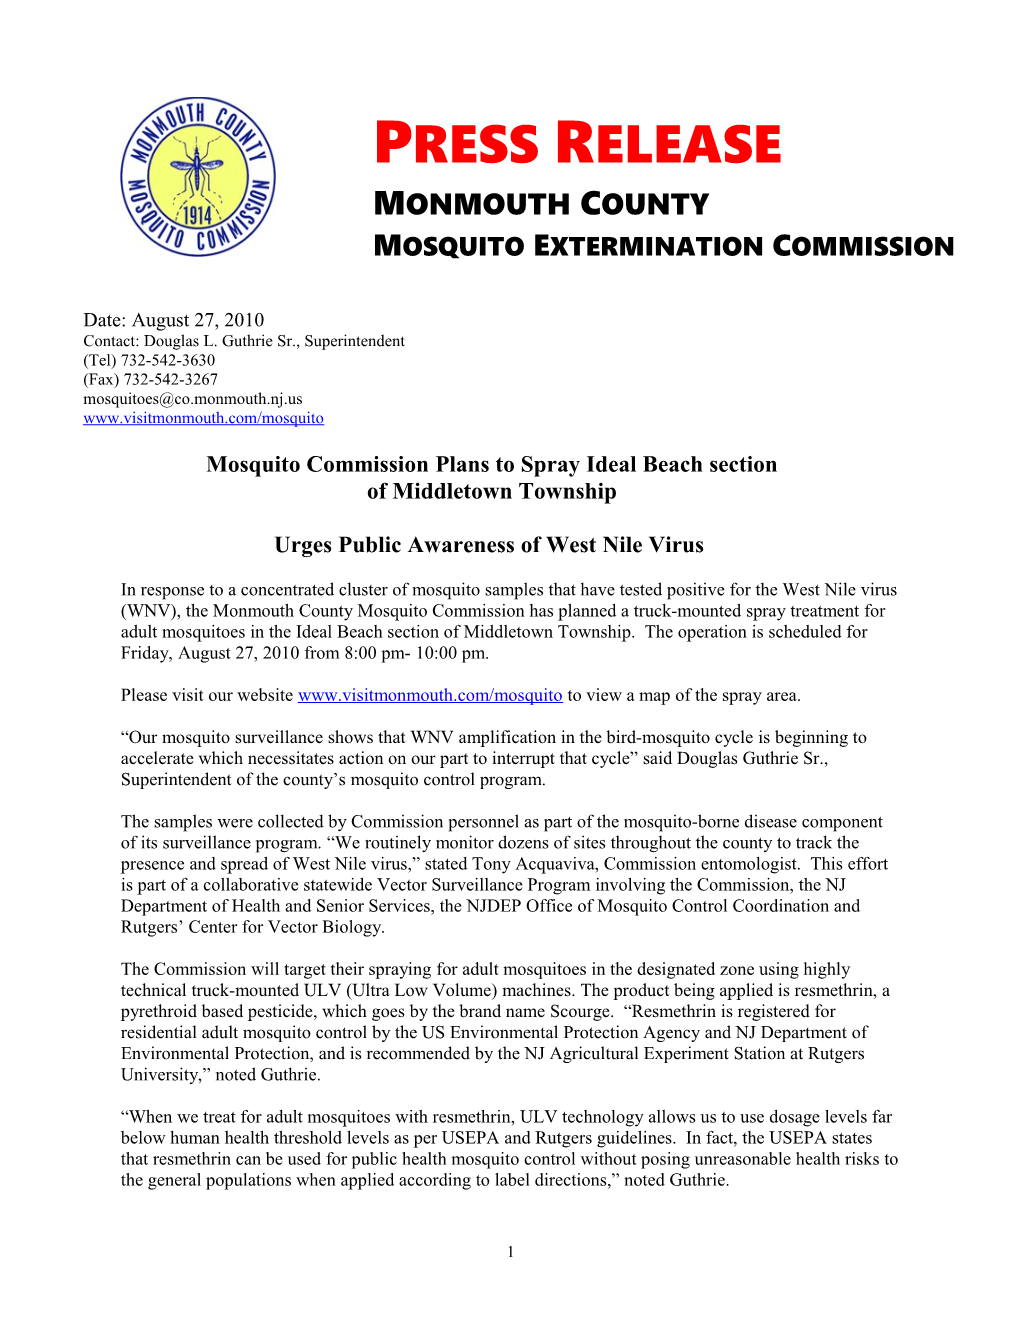 Mosquito Commission Plans to Sprayidealbeach Section